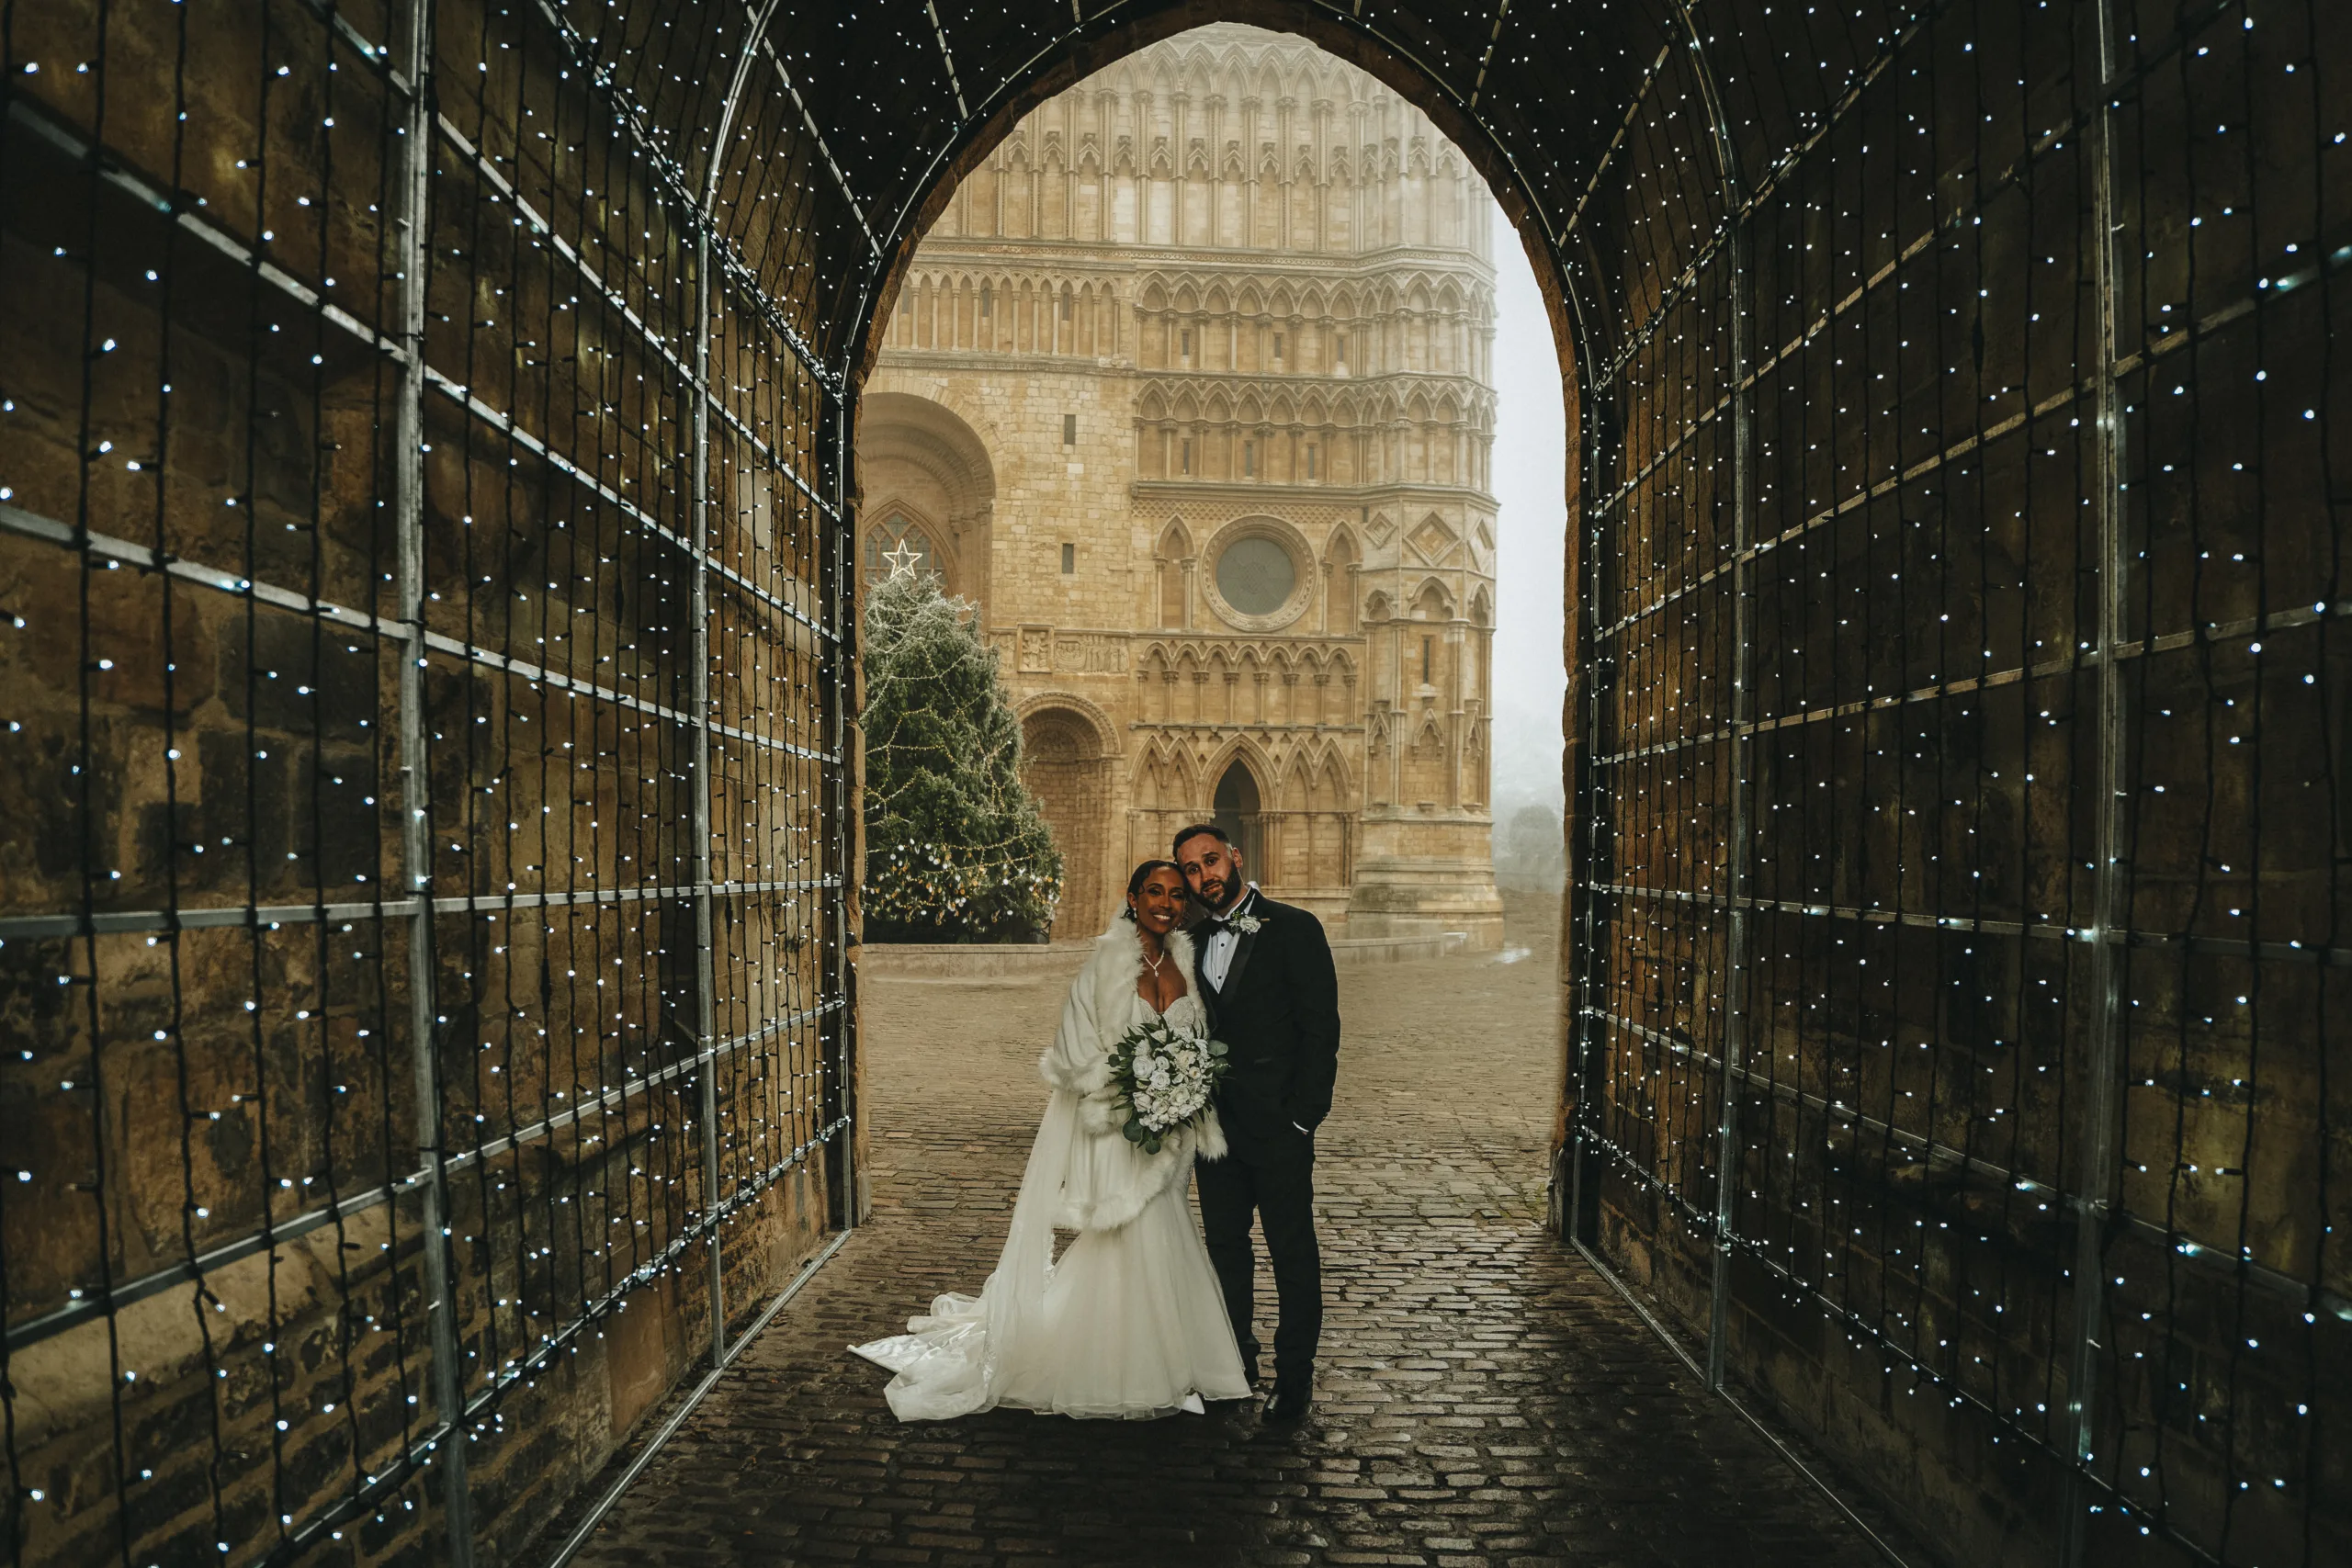 A bride and groom standing in an archway in front of a castle for their wedding.